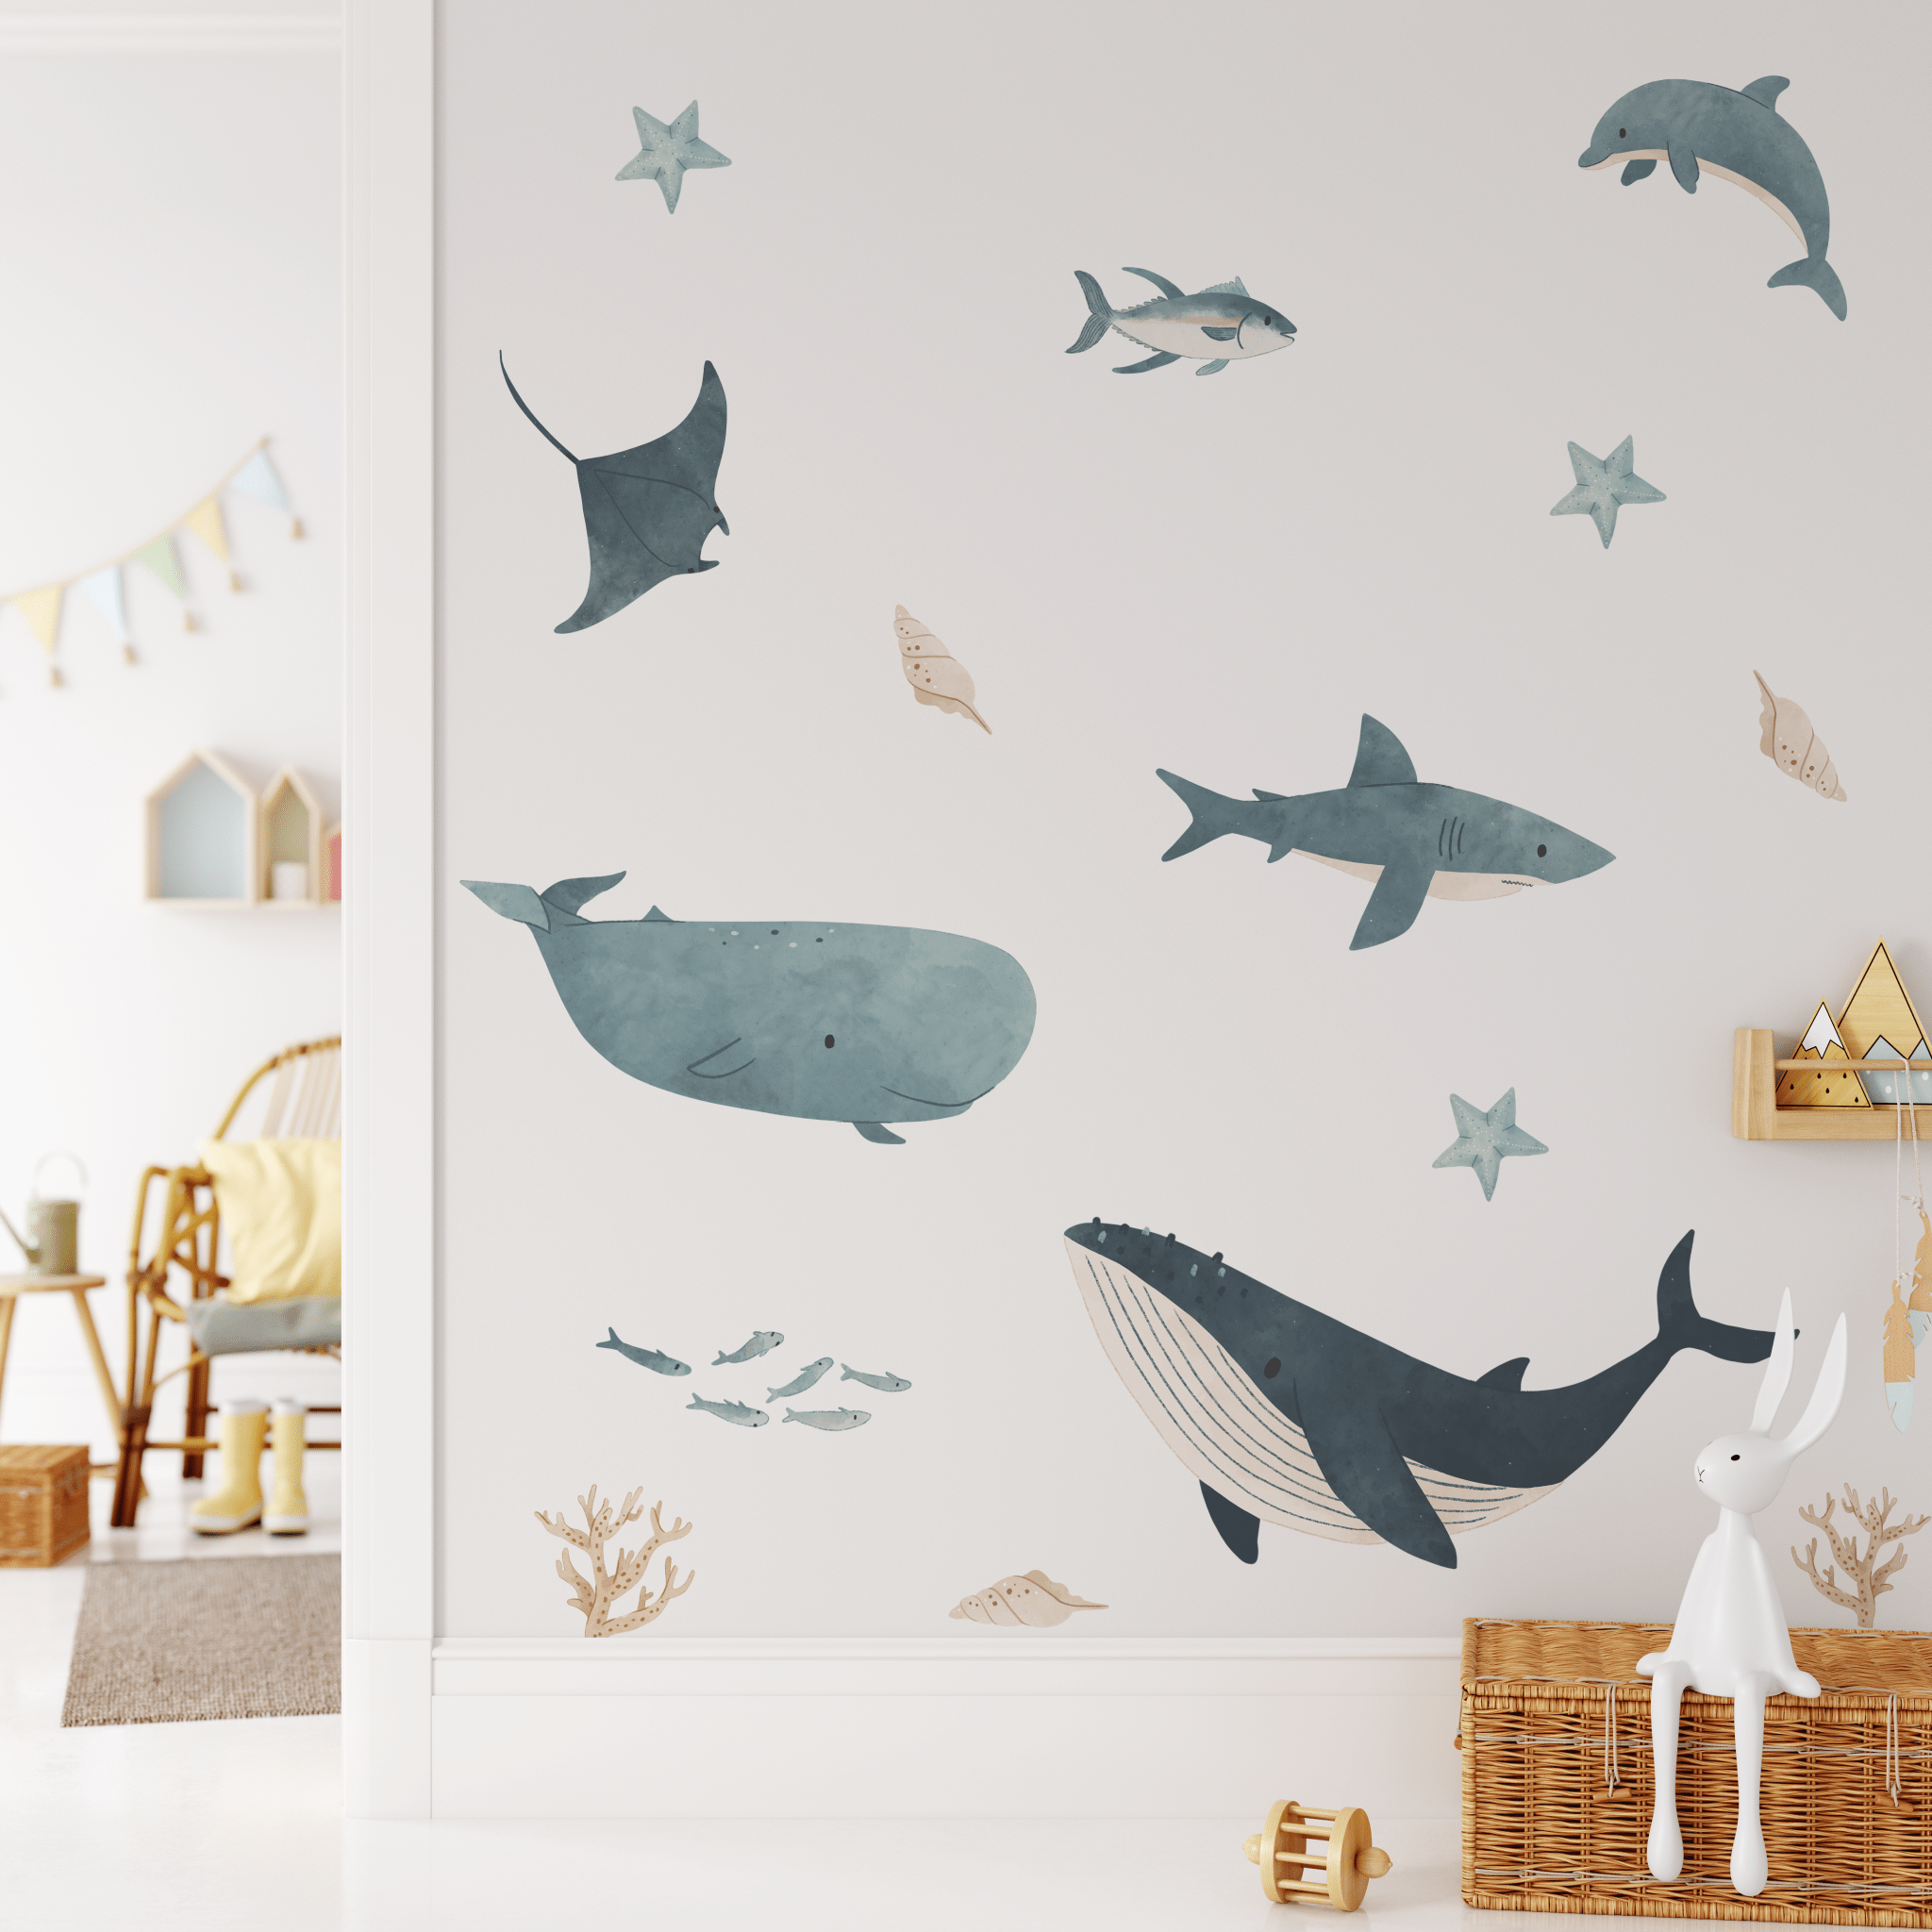 Playful ocean-themed wall stickers in a children's room featuring sea stars and fish, complemented by a white rabbit figurine and wicker baskets.